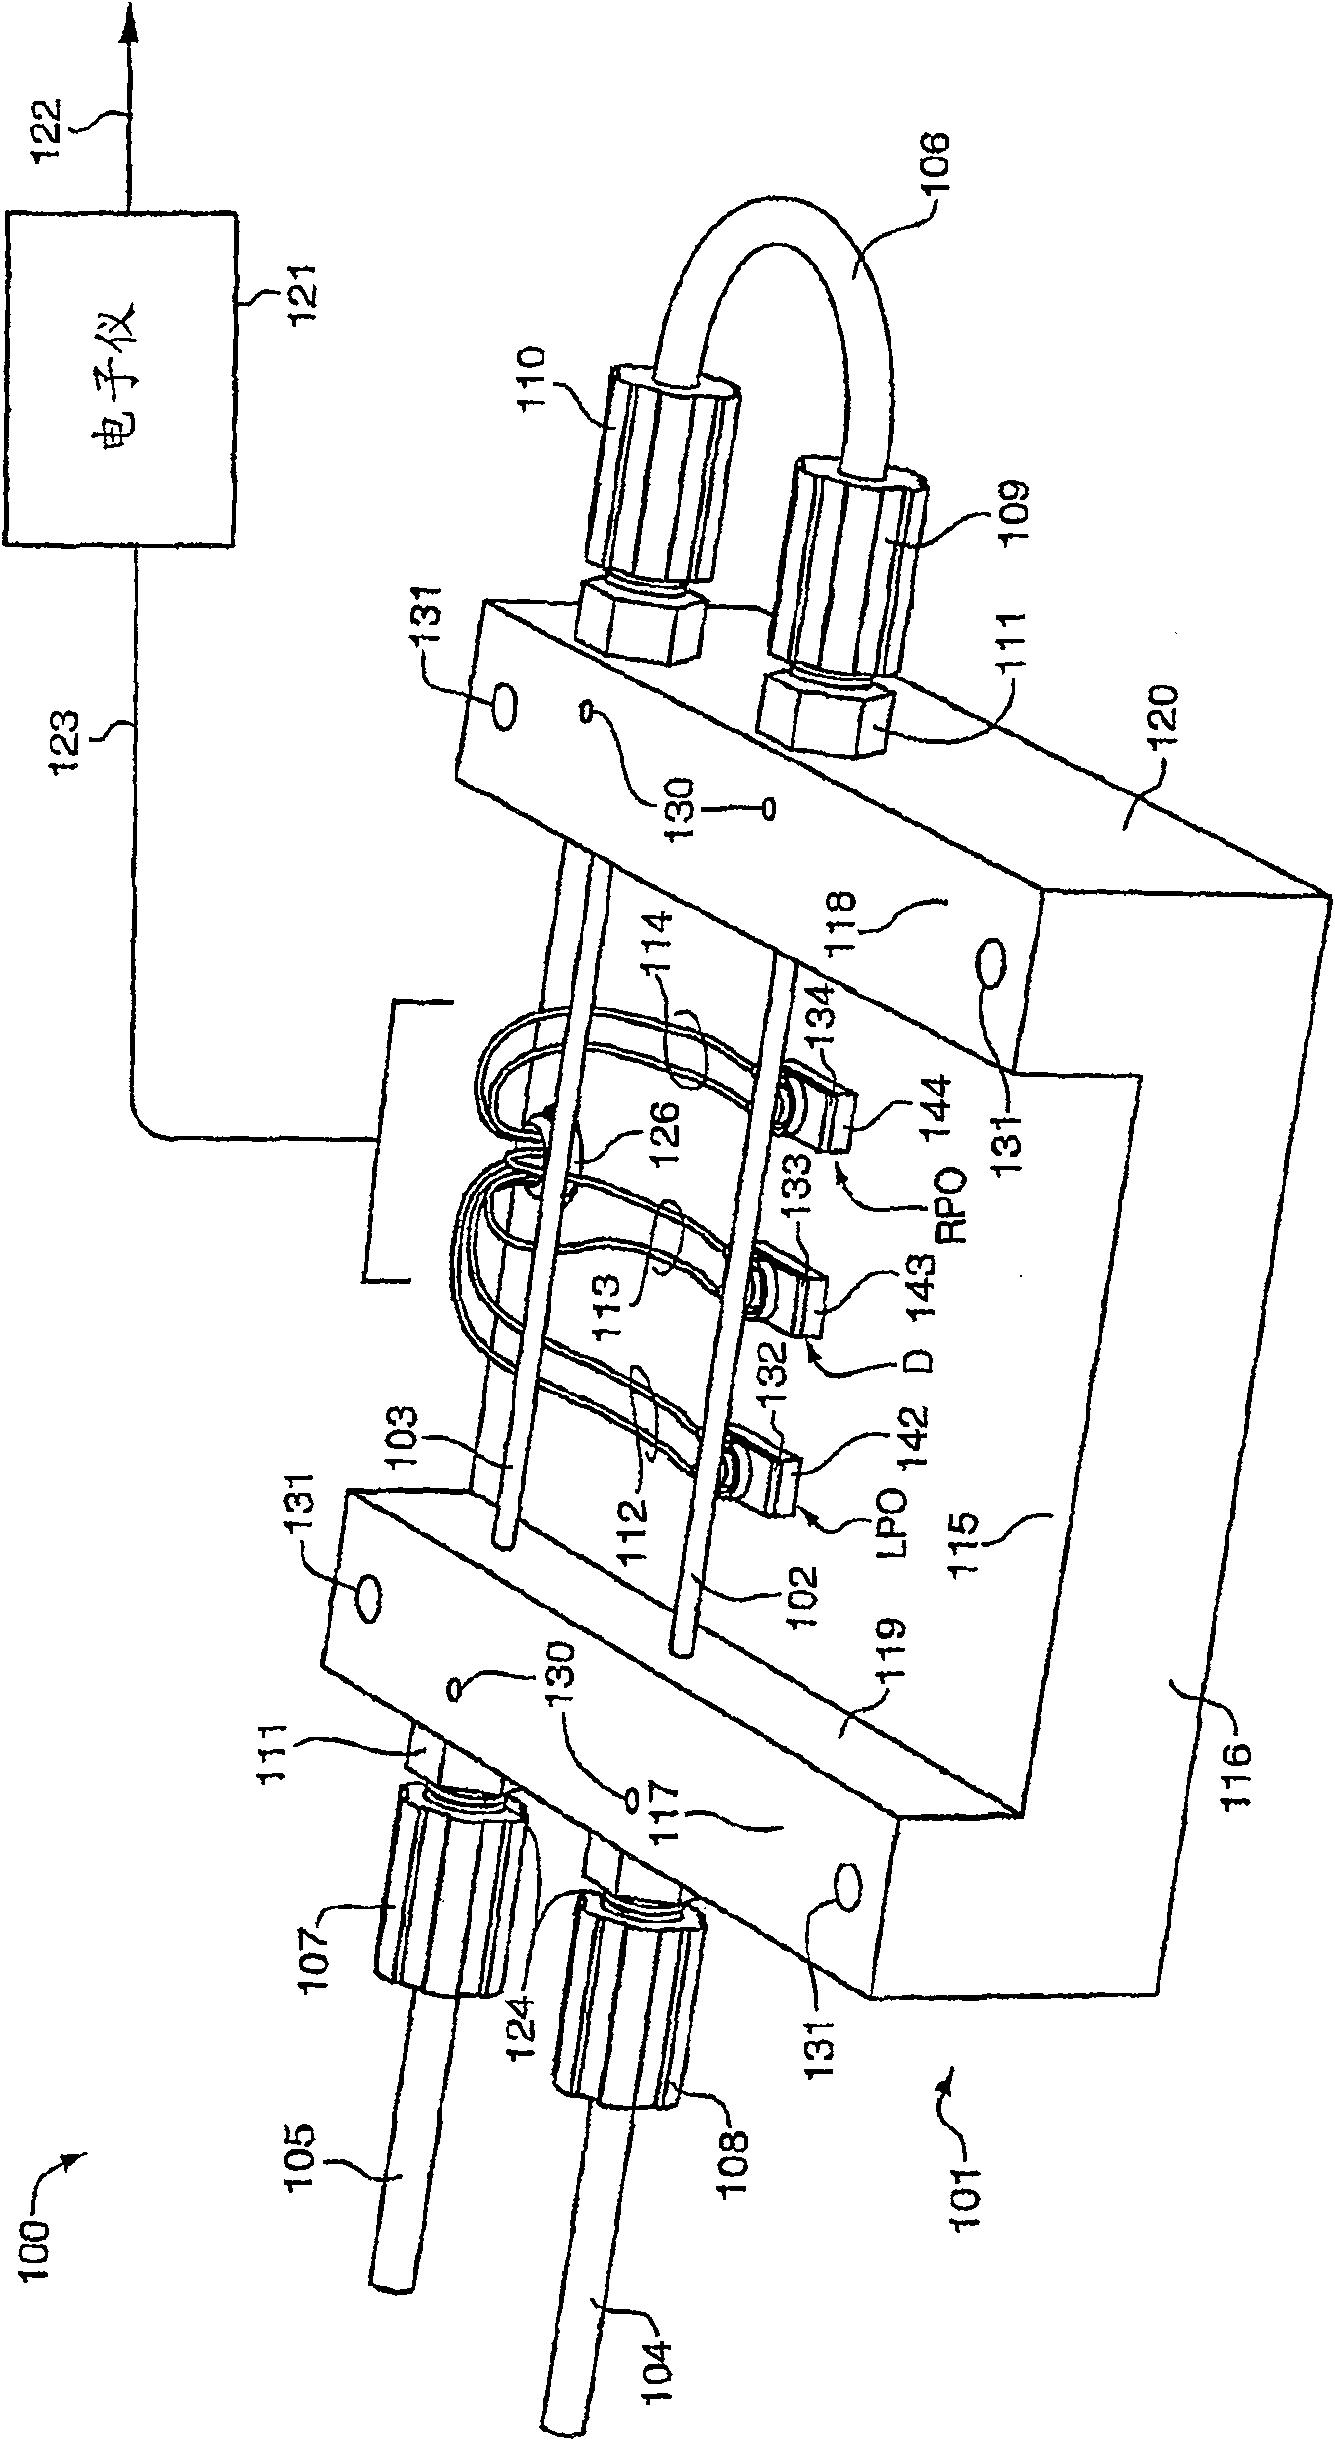 Compensation method and apparatus for a Coriolis flow meter